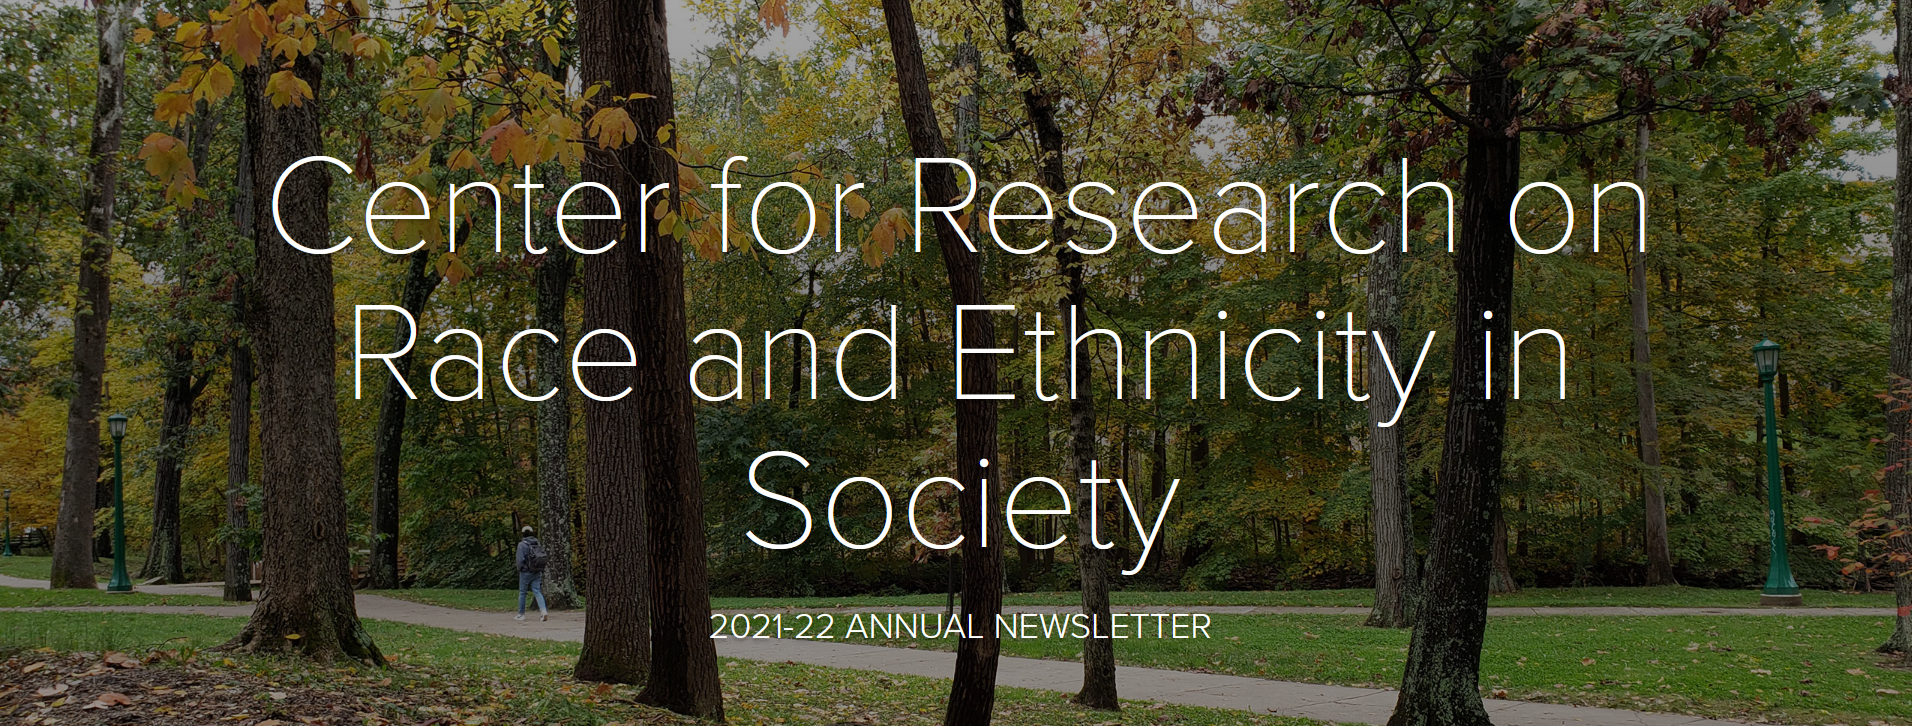 Decorative banner image for the CRRES 2021-22 newsletter. White text reads "Center for Research on Race and Ethnicity in Society, 2021-22 Annual Newsletter" over an image of a wooded brick path through campus